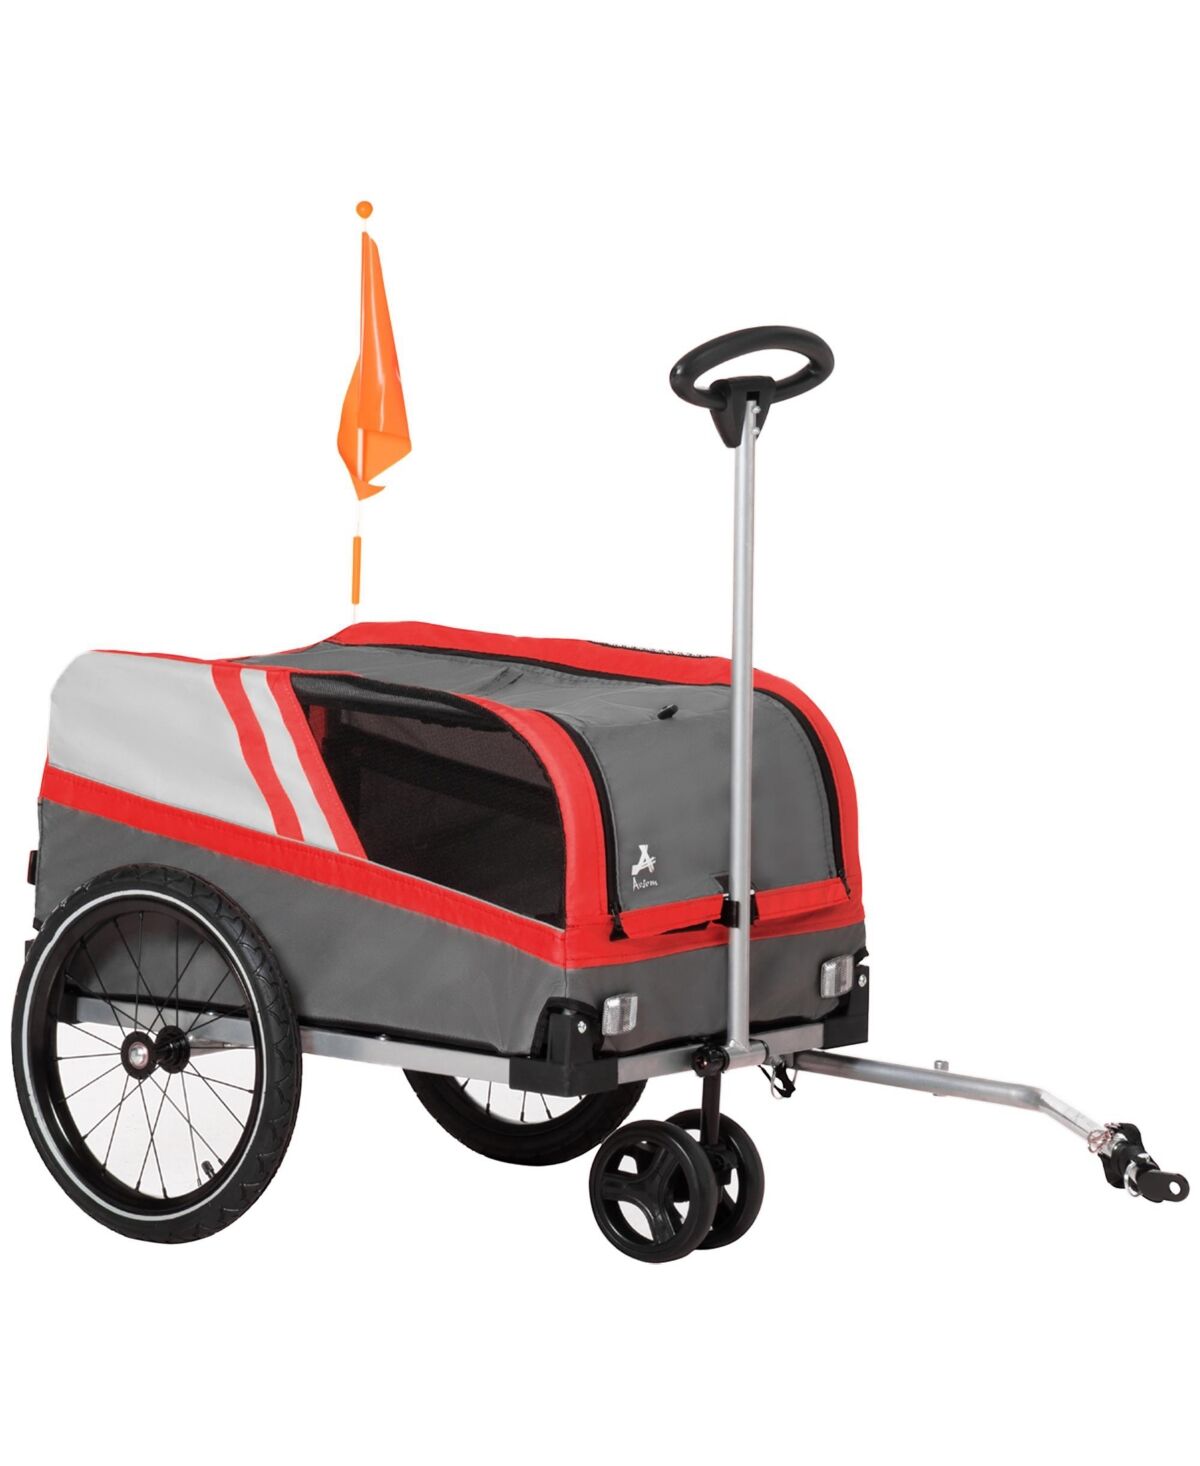 Aosom Dog Bike Trailer 2-in-1 Travel Dog Stroller, Bike Cargo Trailer, Small Pet Bicycle Cart Carrier with Universal Coupler, Safety Leash, and Easy F